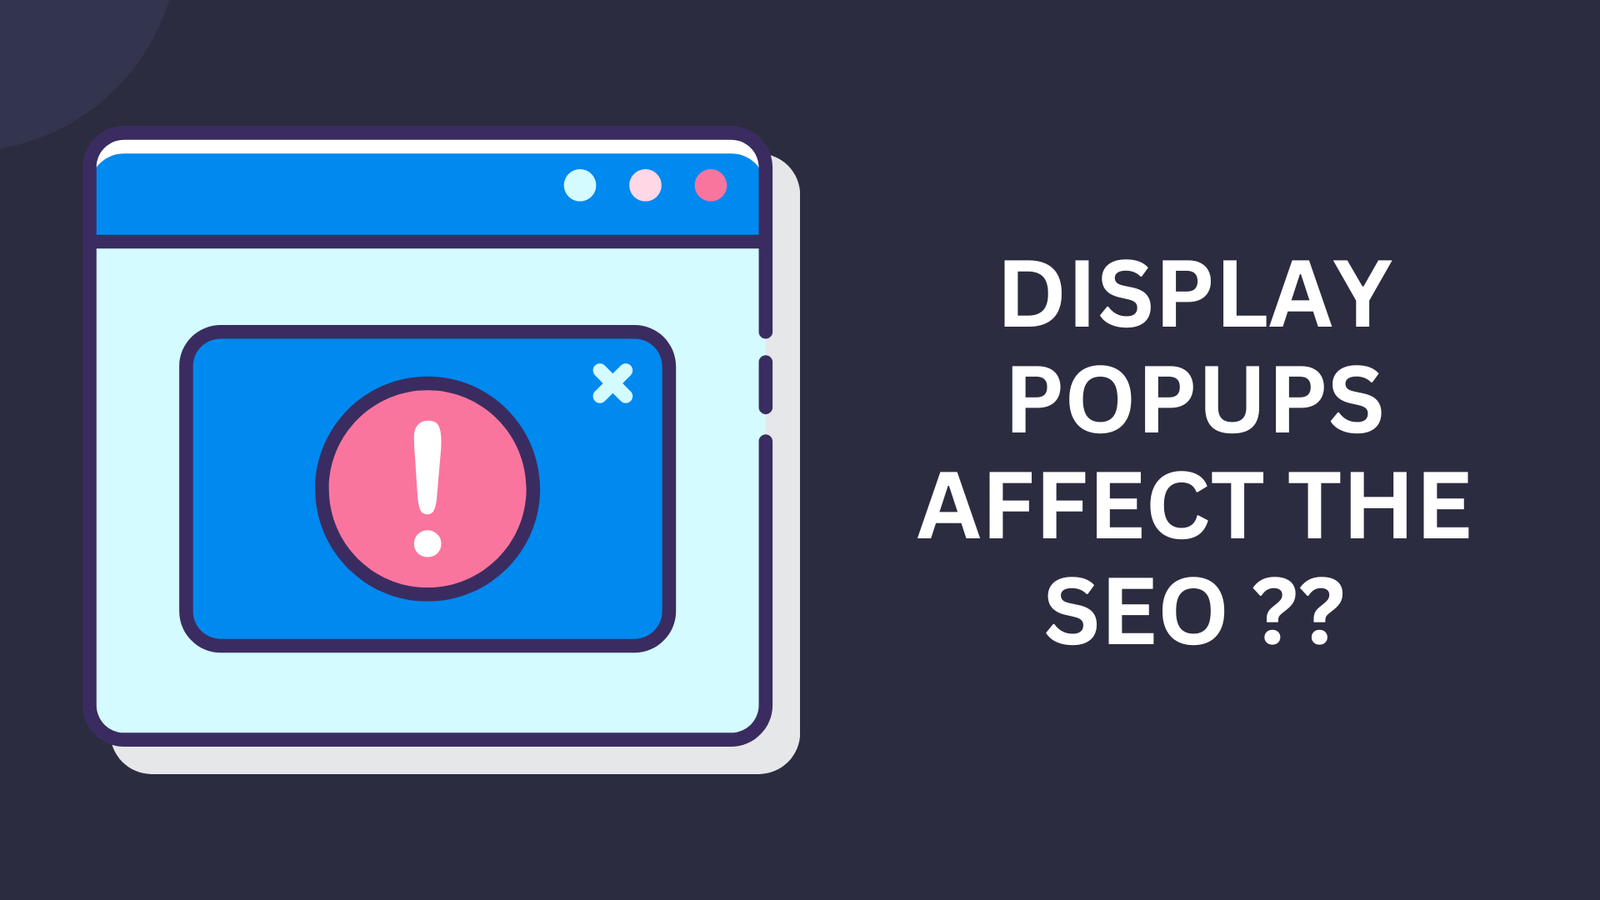 How Display Popups affect the SEO of a website